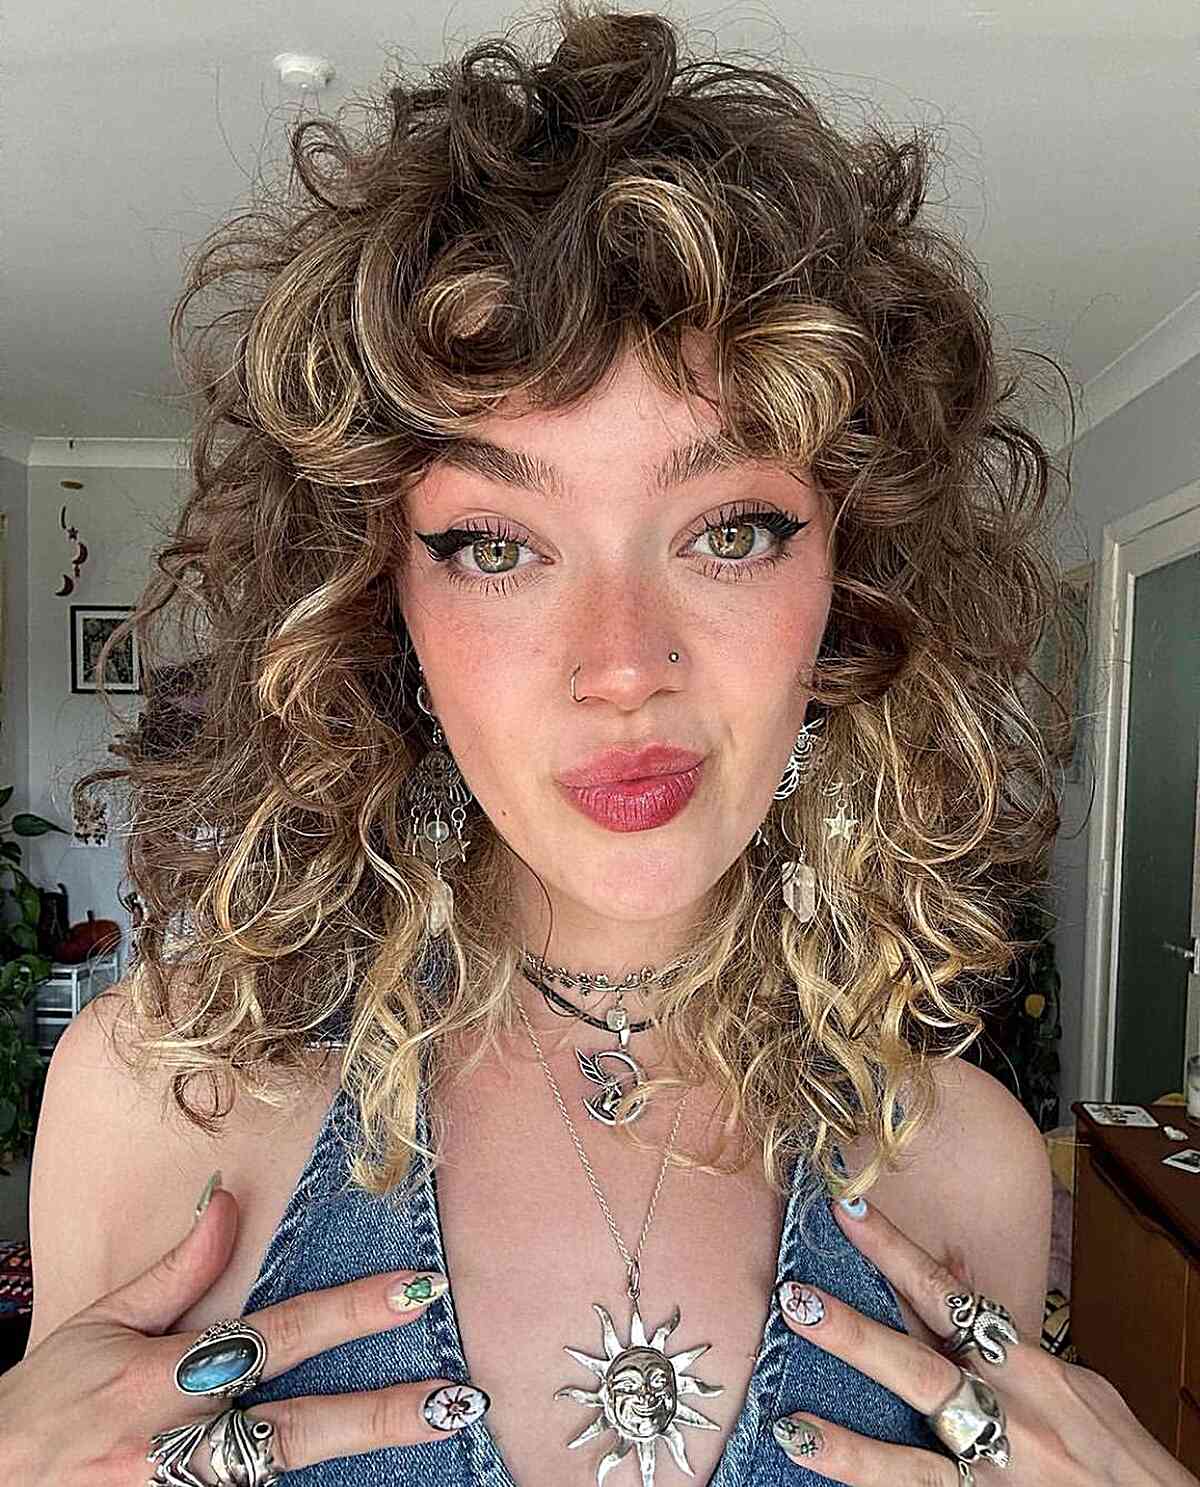 Vintage-90s-Style Medium Curly Shag and Bangs